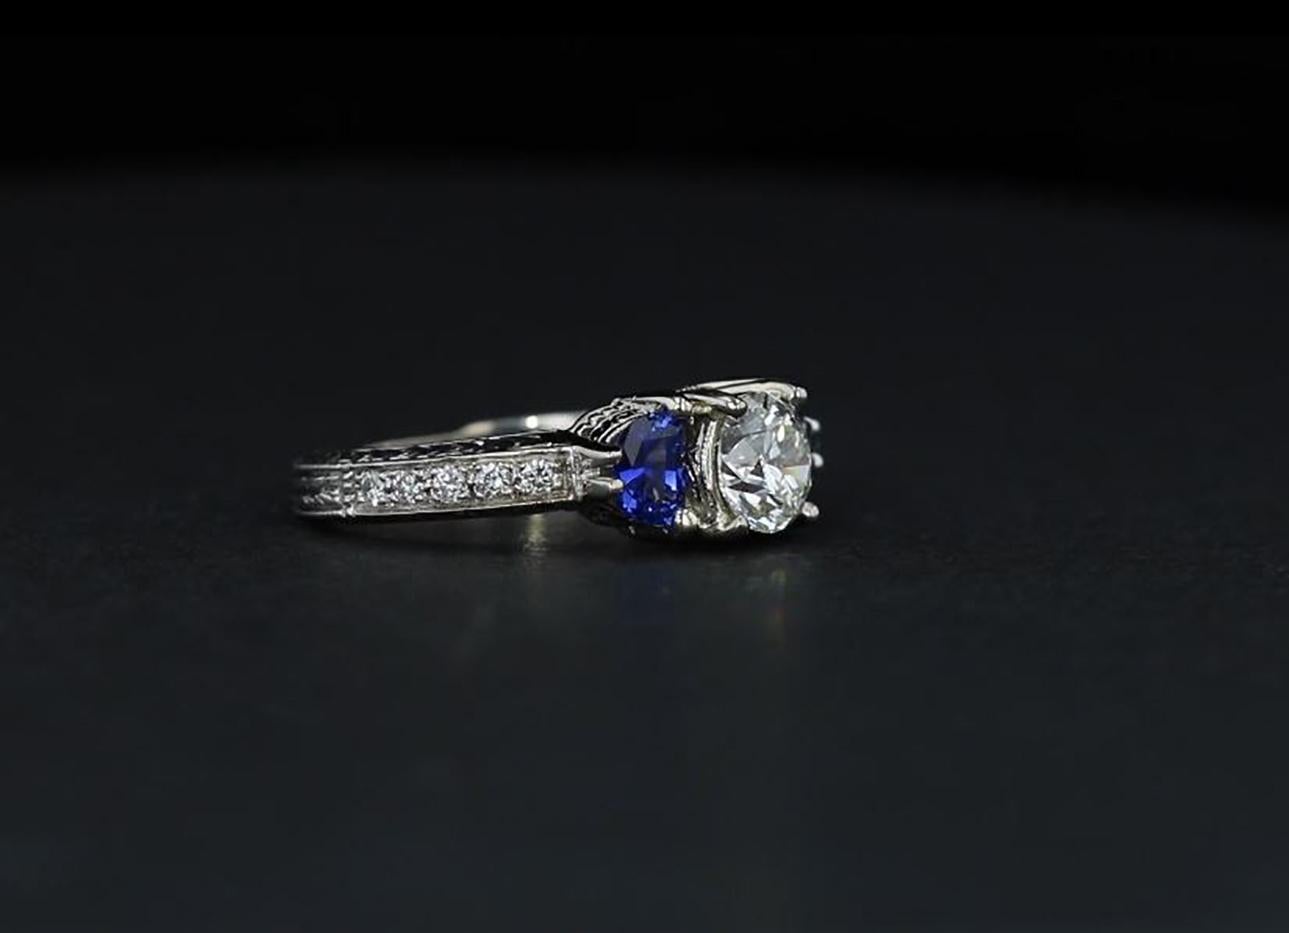 A contemporary take on the classic three-stone engagement ring, a 1.00 carat round diamond in the center of a 14k white gold setting is framed by two half-moon blue sapphires. Delicate engraving and diamonds adorn the ring's shank.